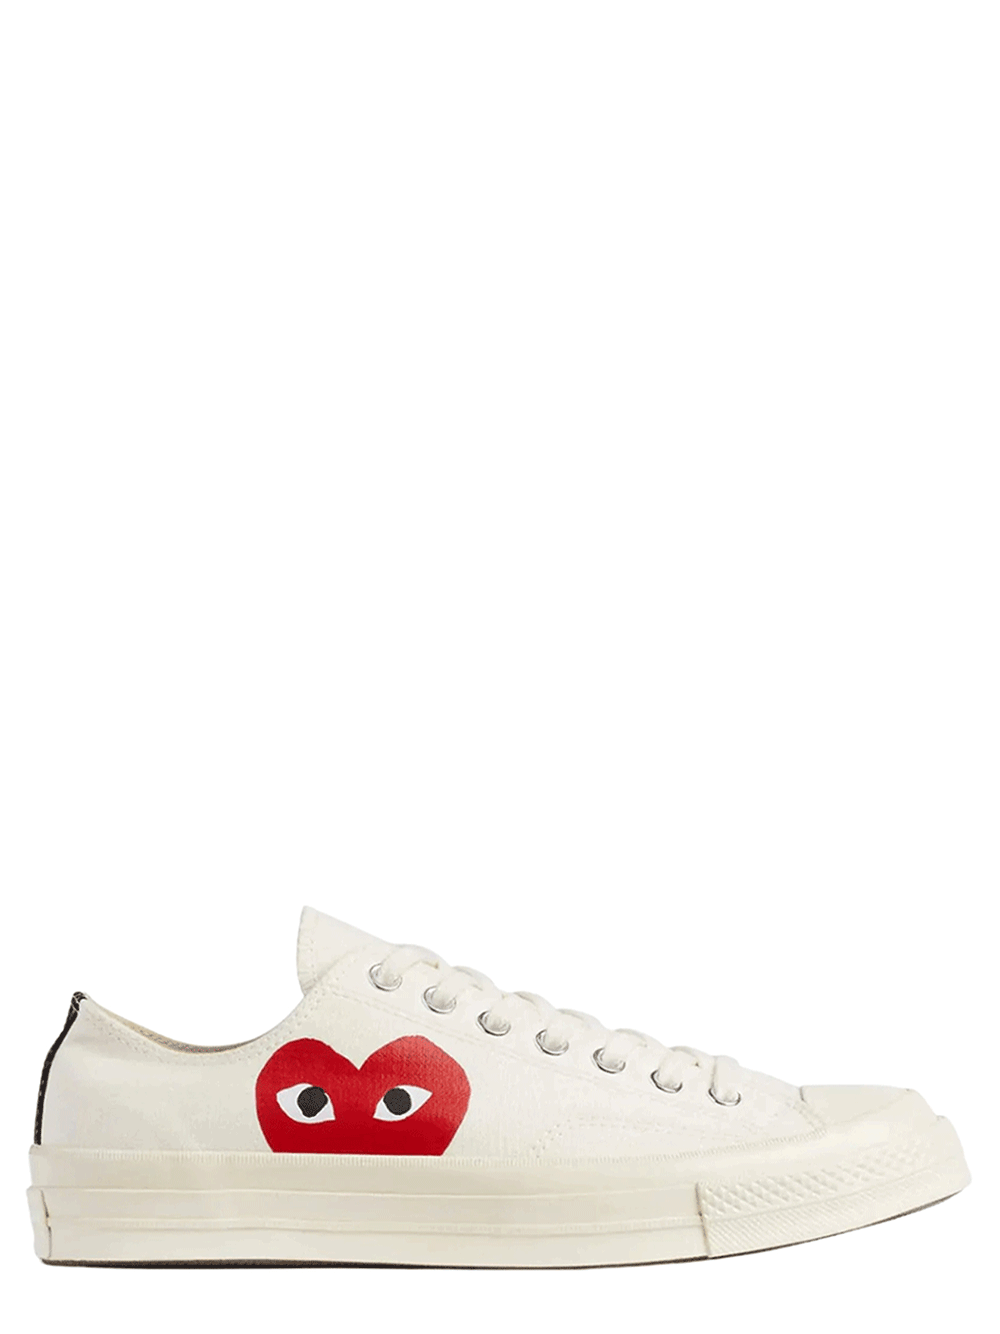 COMME-des-GARCONS-PLAY-CONVERSE-Converse-Peek-A-Boo-Heart-Low-Cut-Sneakers-White-1